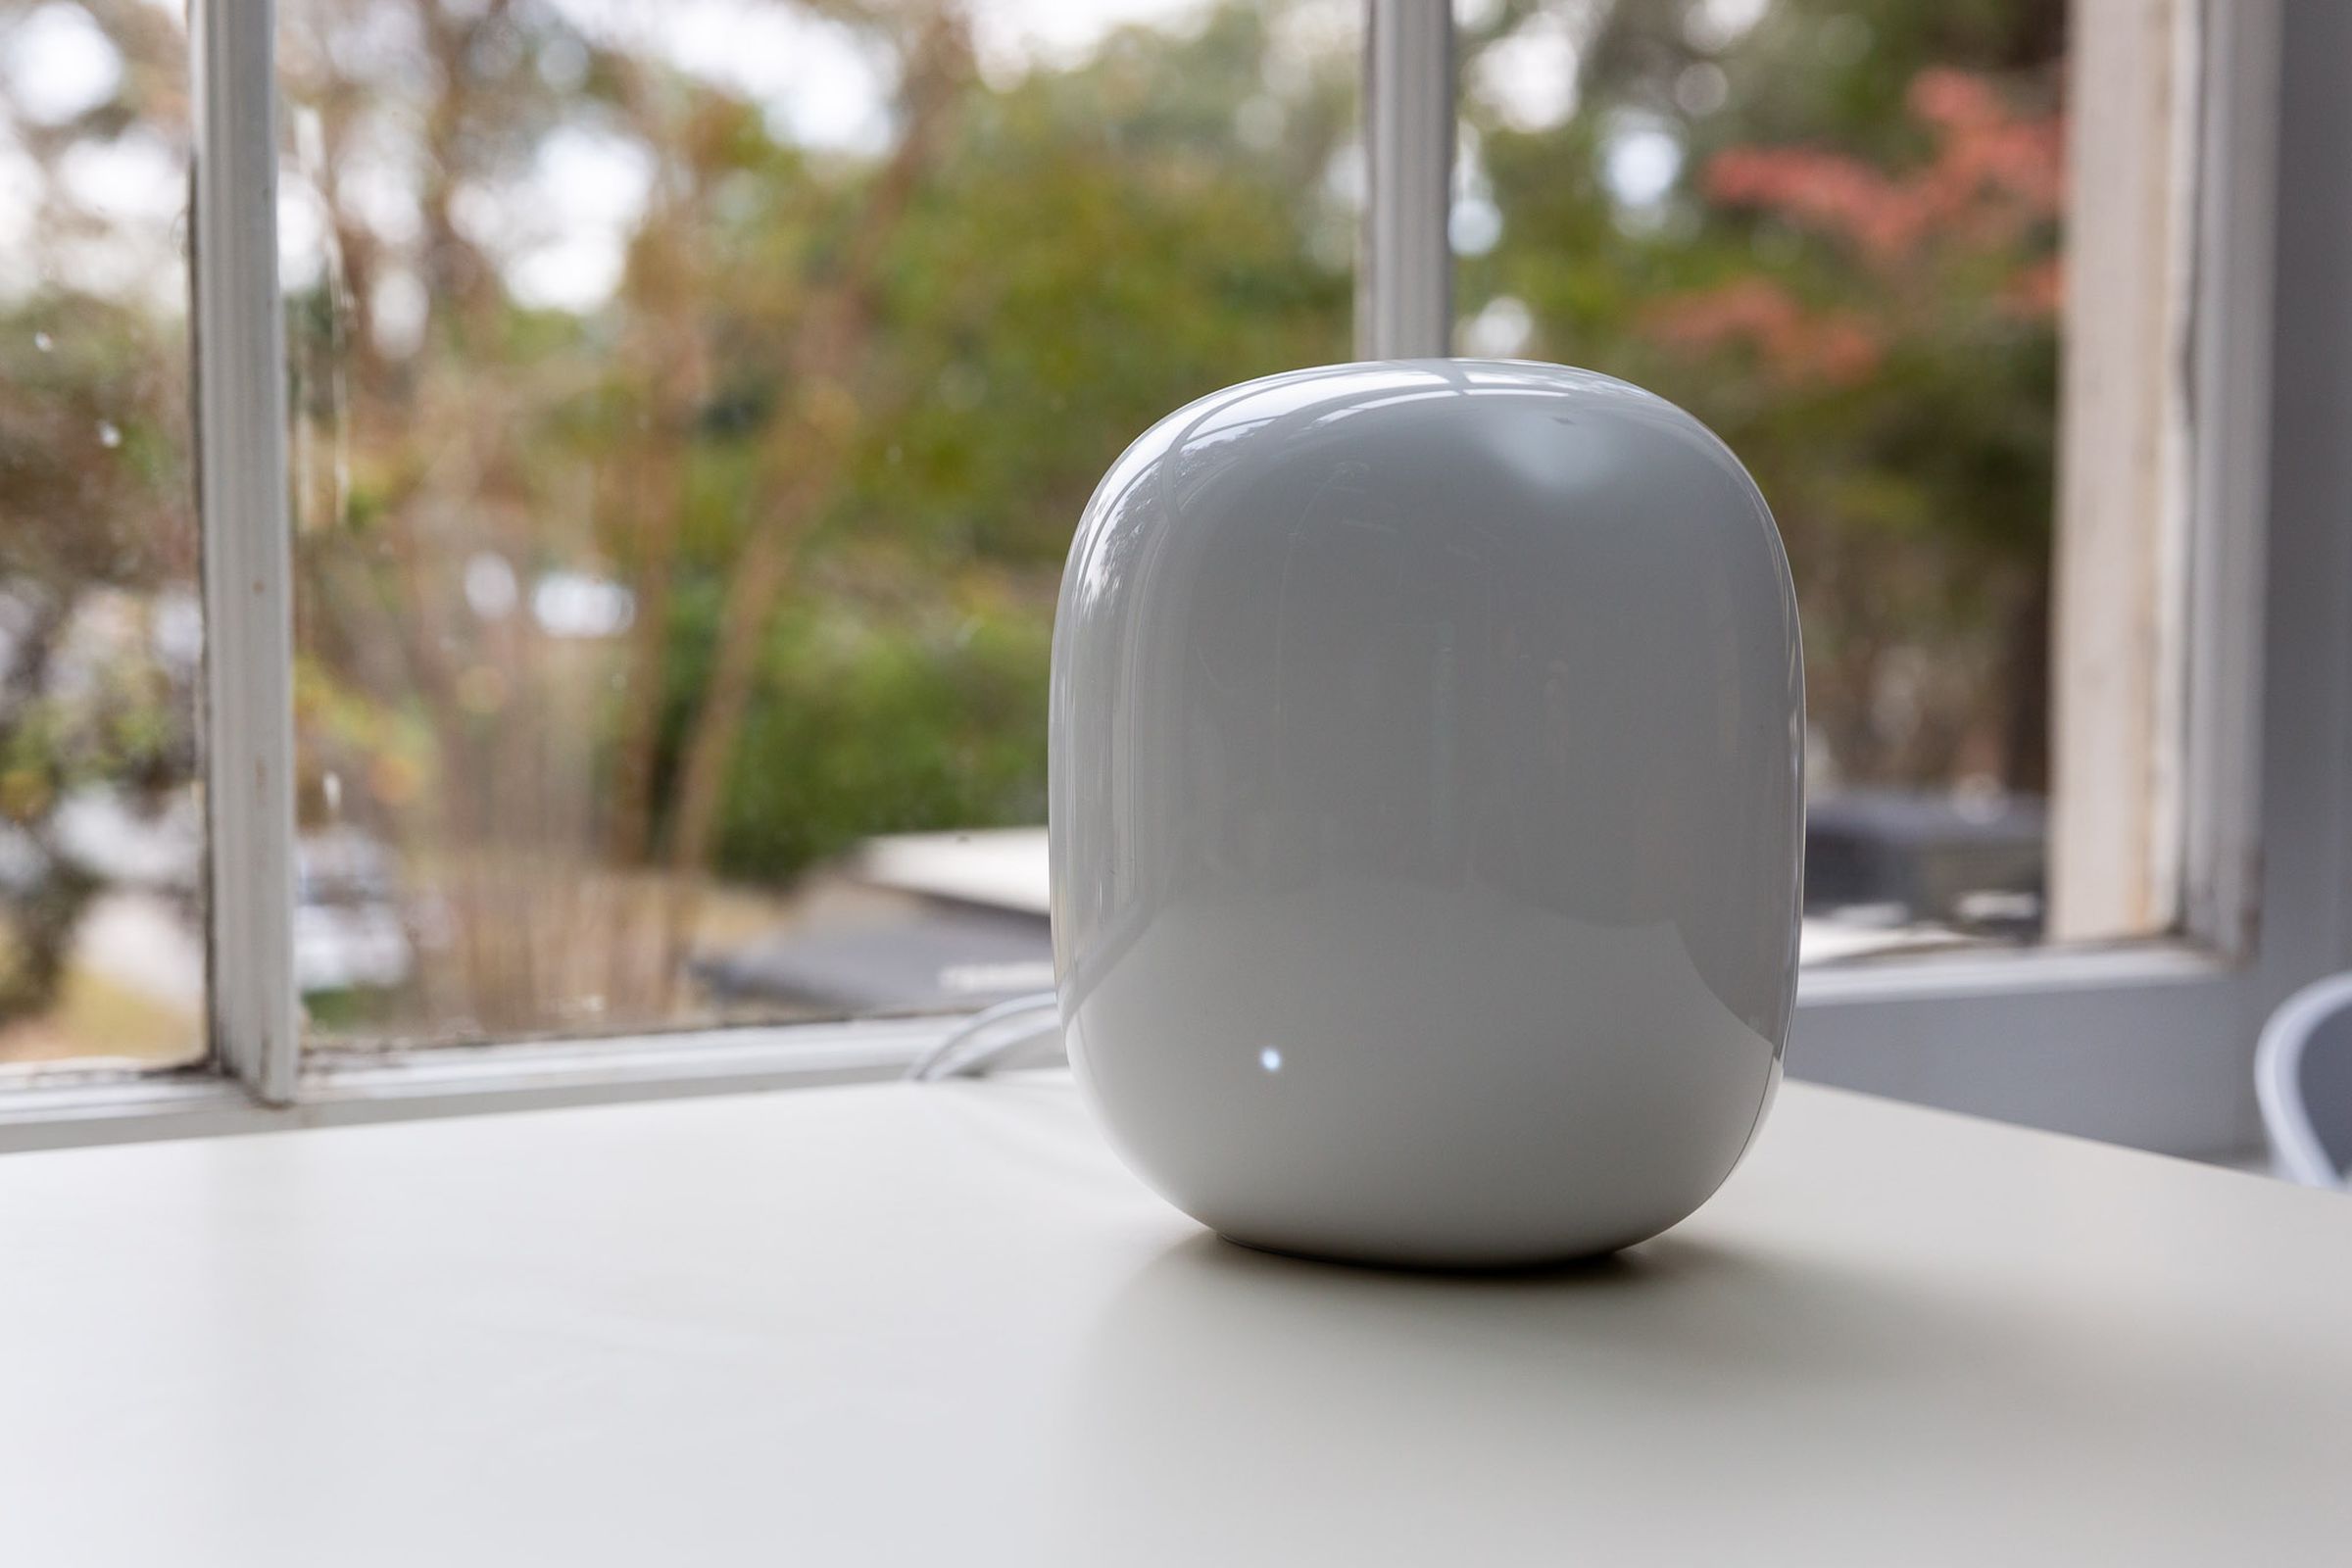 White Google Nest Wifi Pro router on a white table in front of a window.